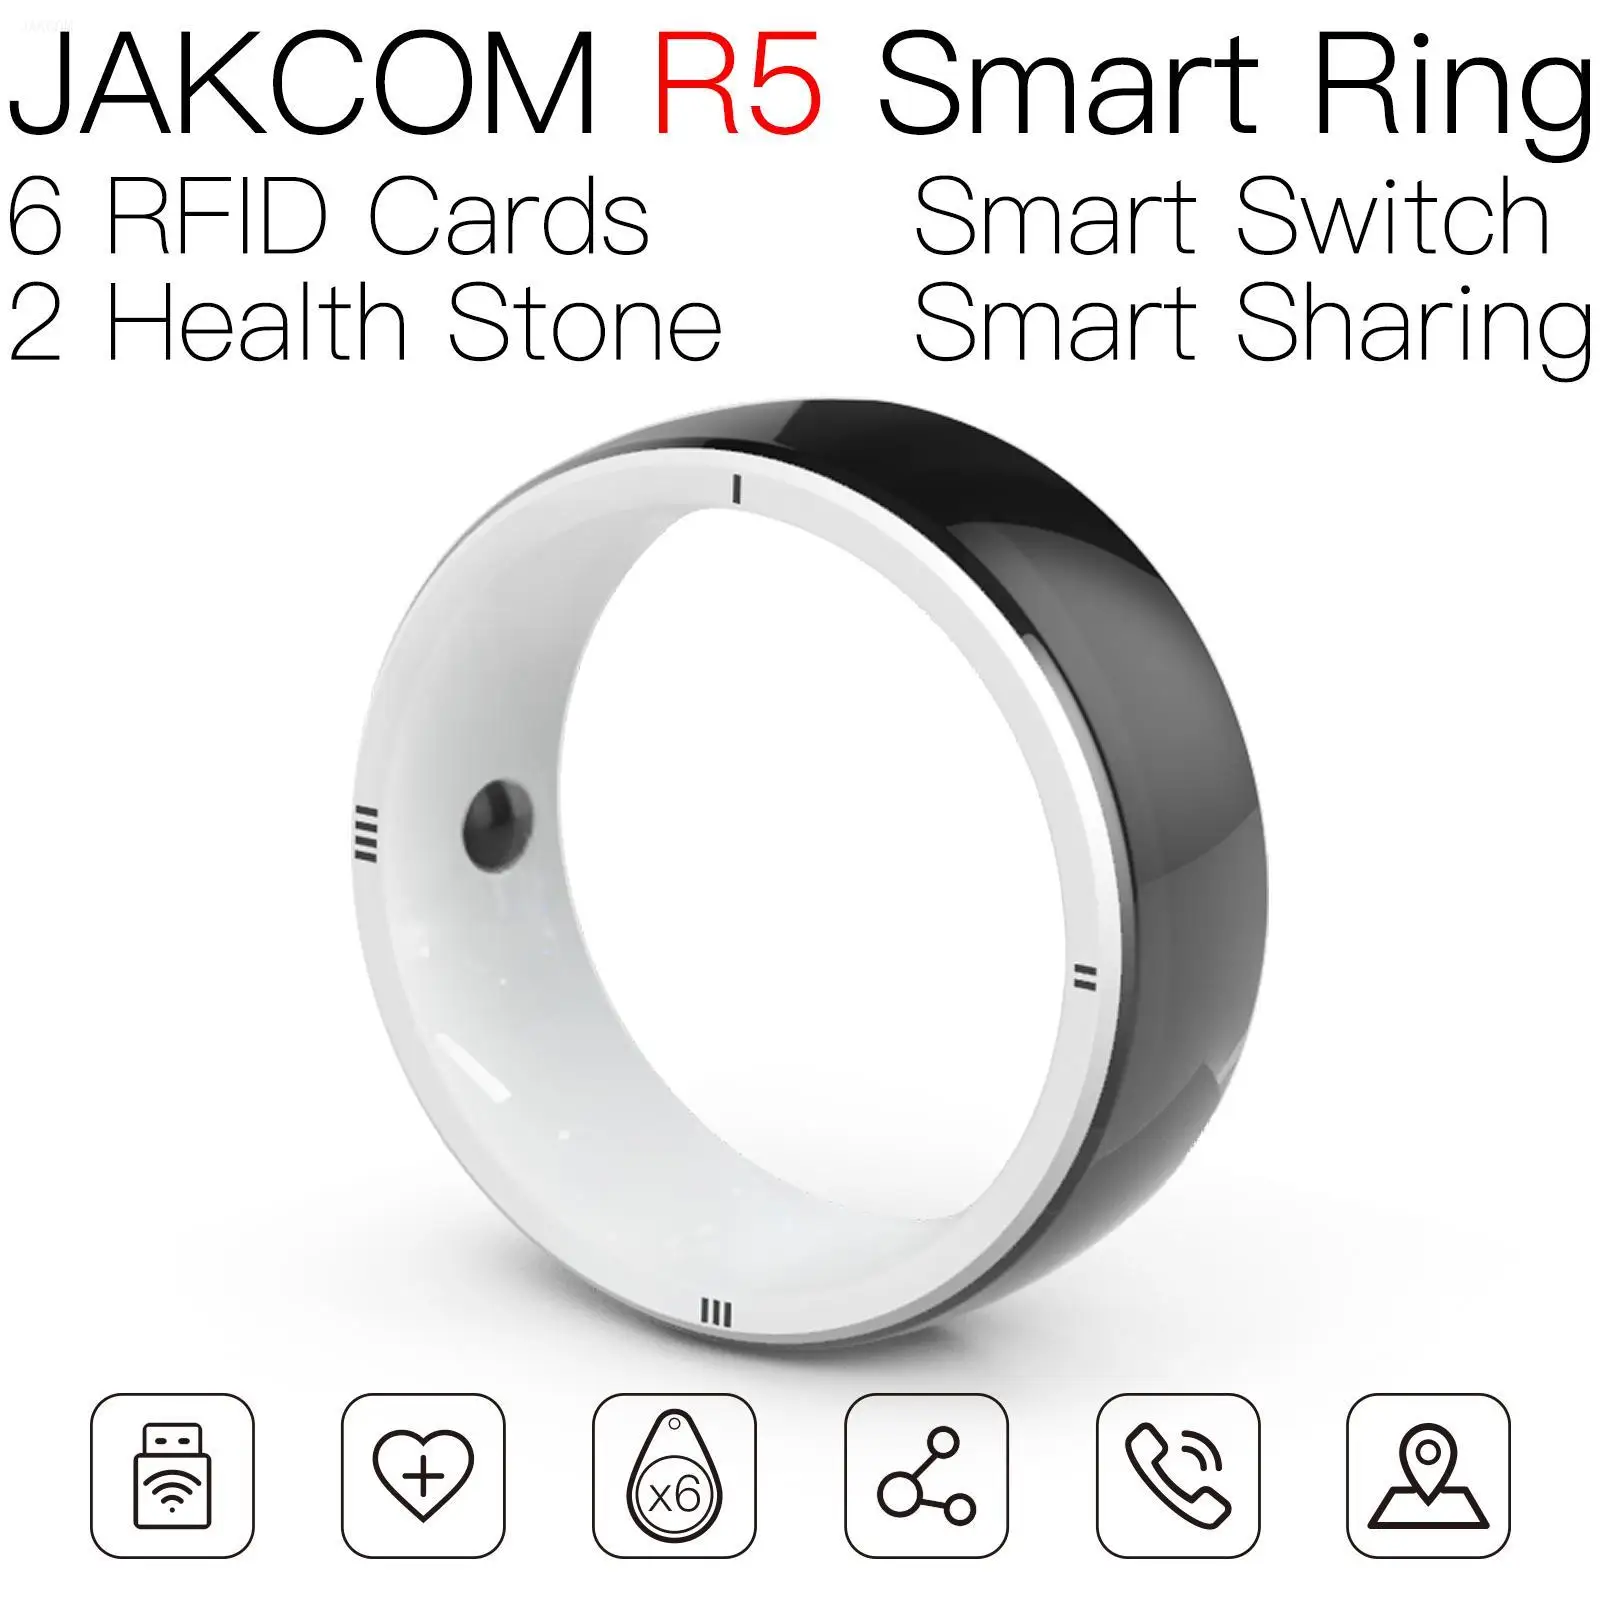 

JAKCOM R5 Smart Ring better than uhf rfid sticker zoccoli chip cable tie nfc tags programmable 125khz